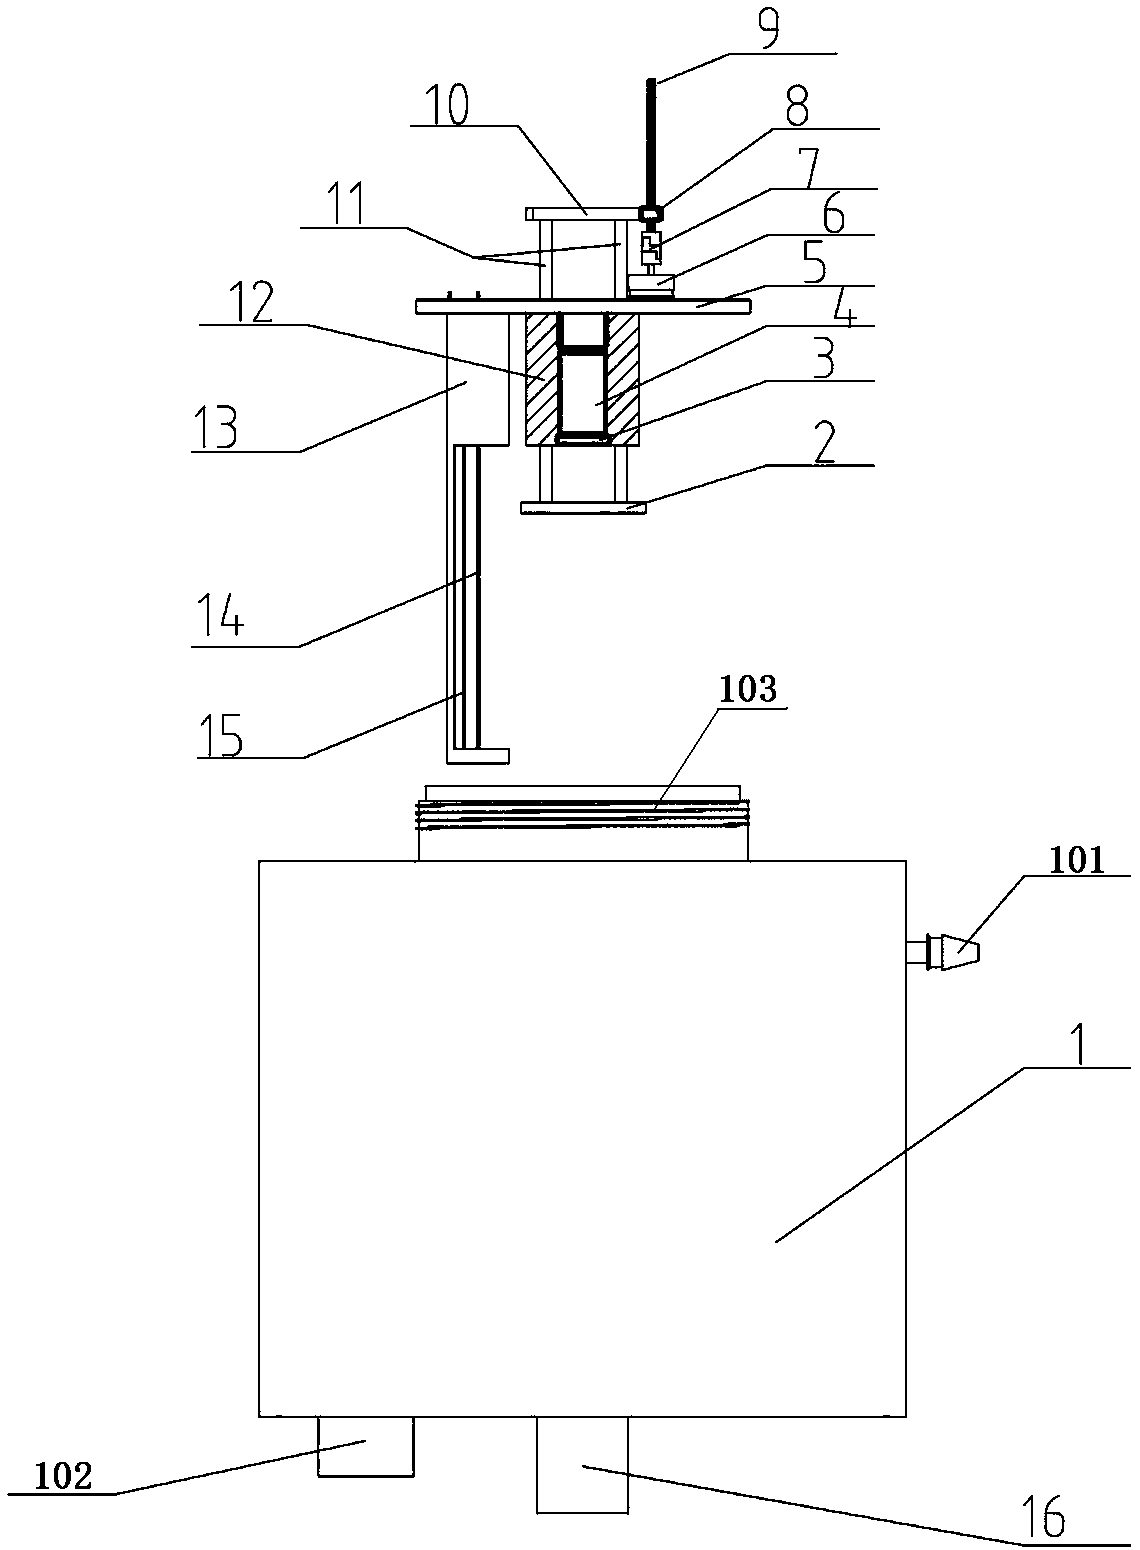 Measuring device for multi-parameters of solid-liquid two-phase flow